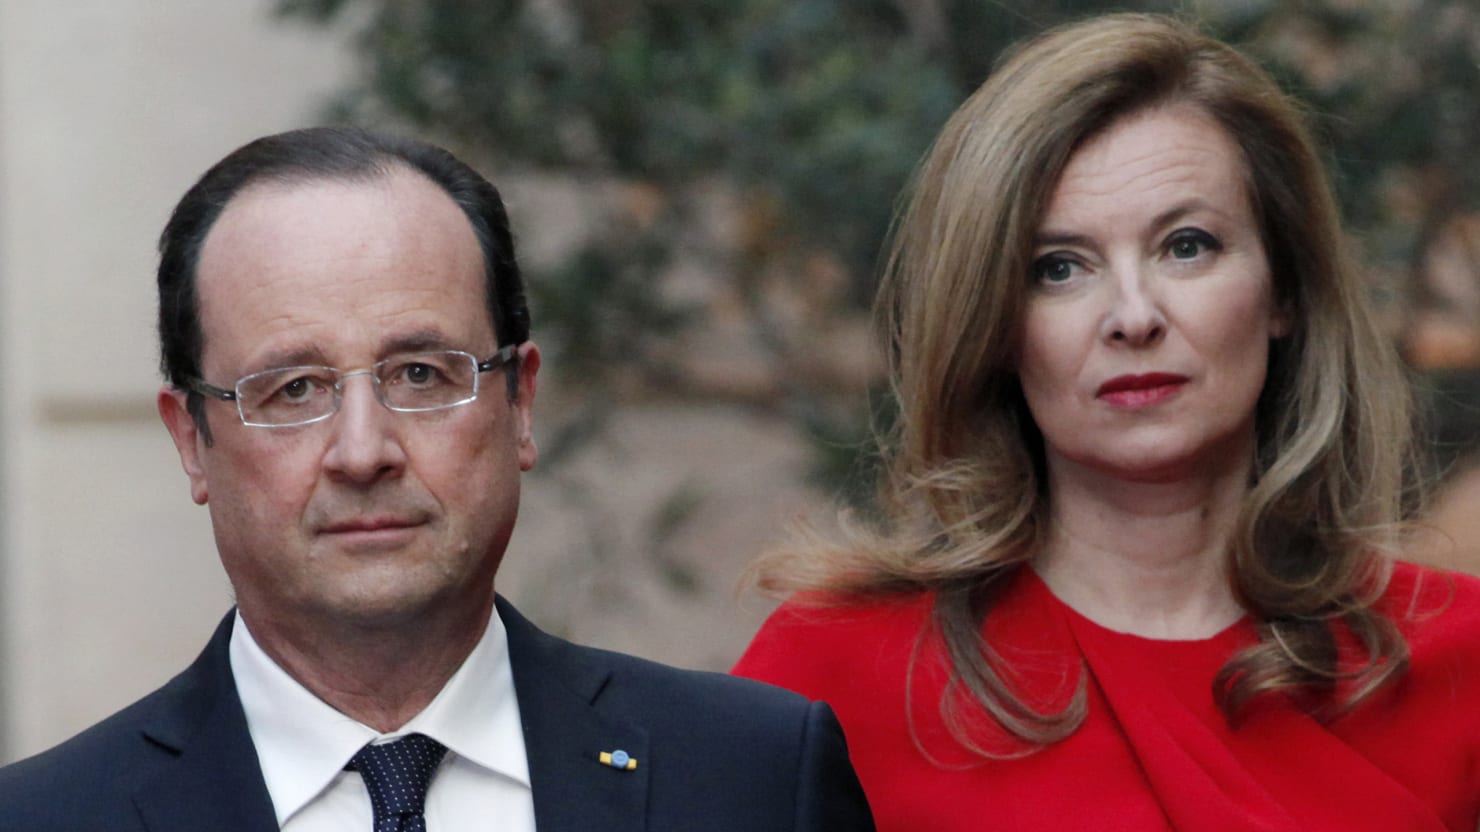 francois hollande announces breakup with first lady valerie trierweiler